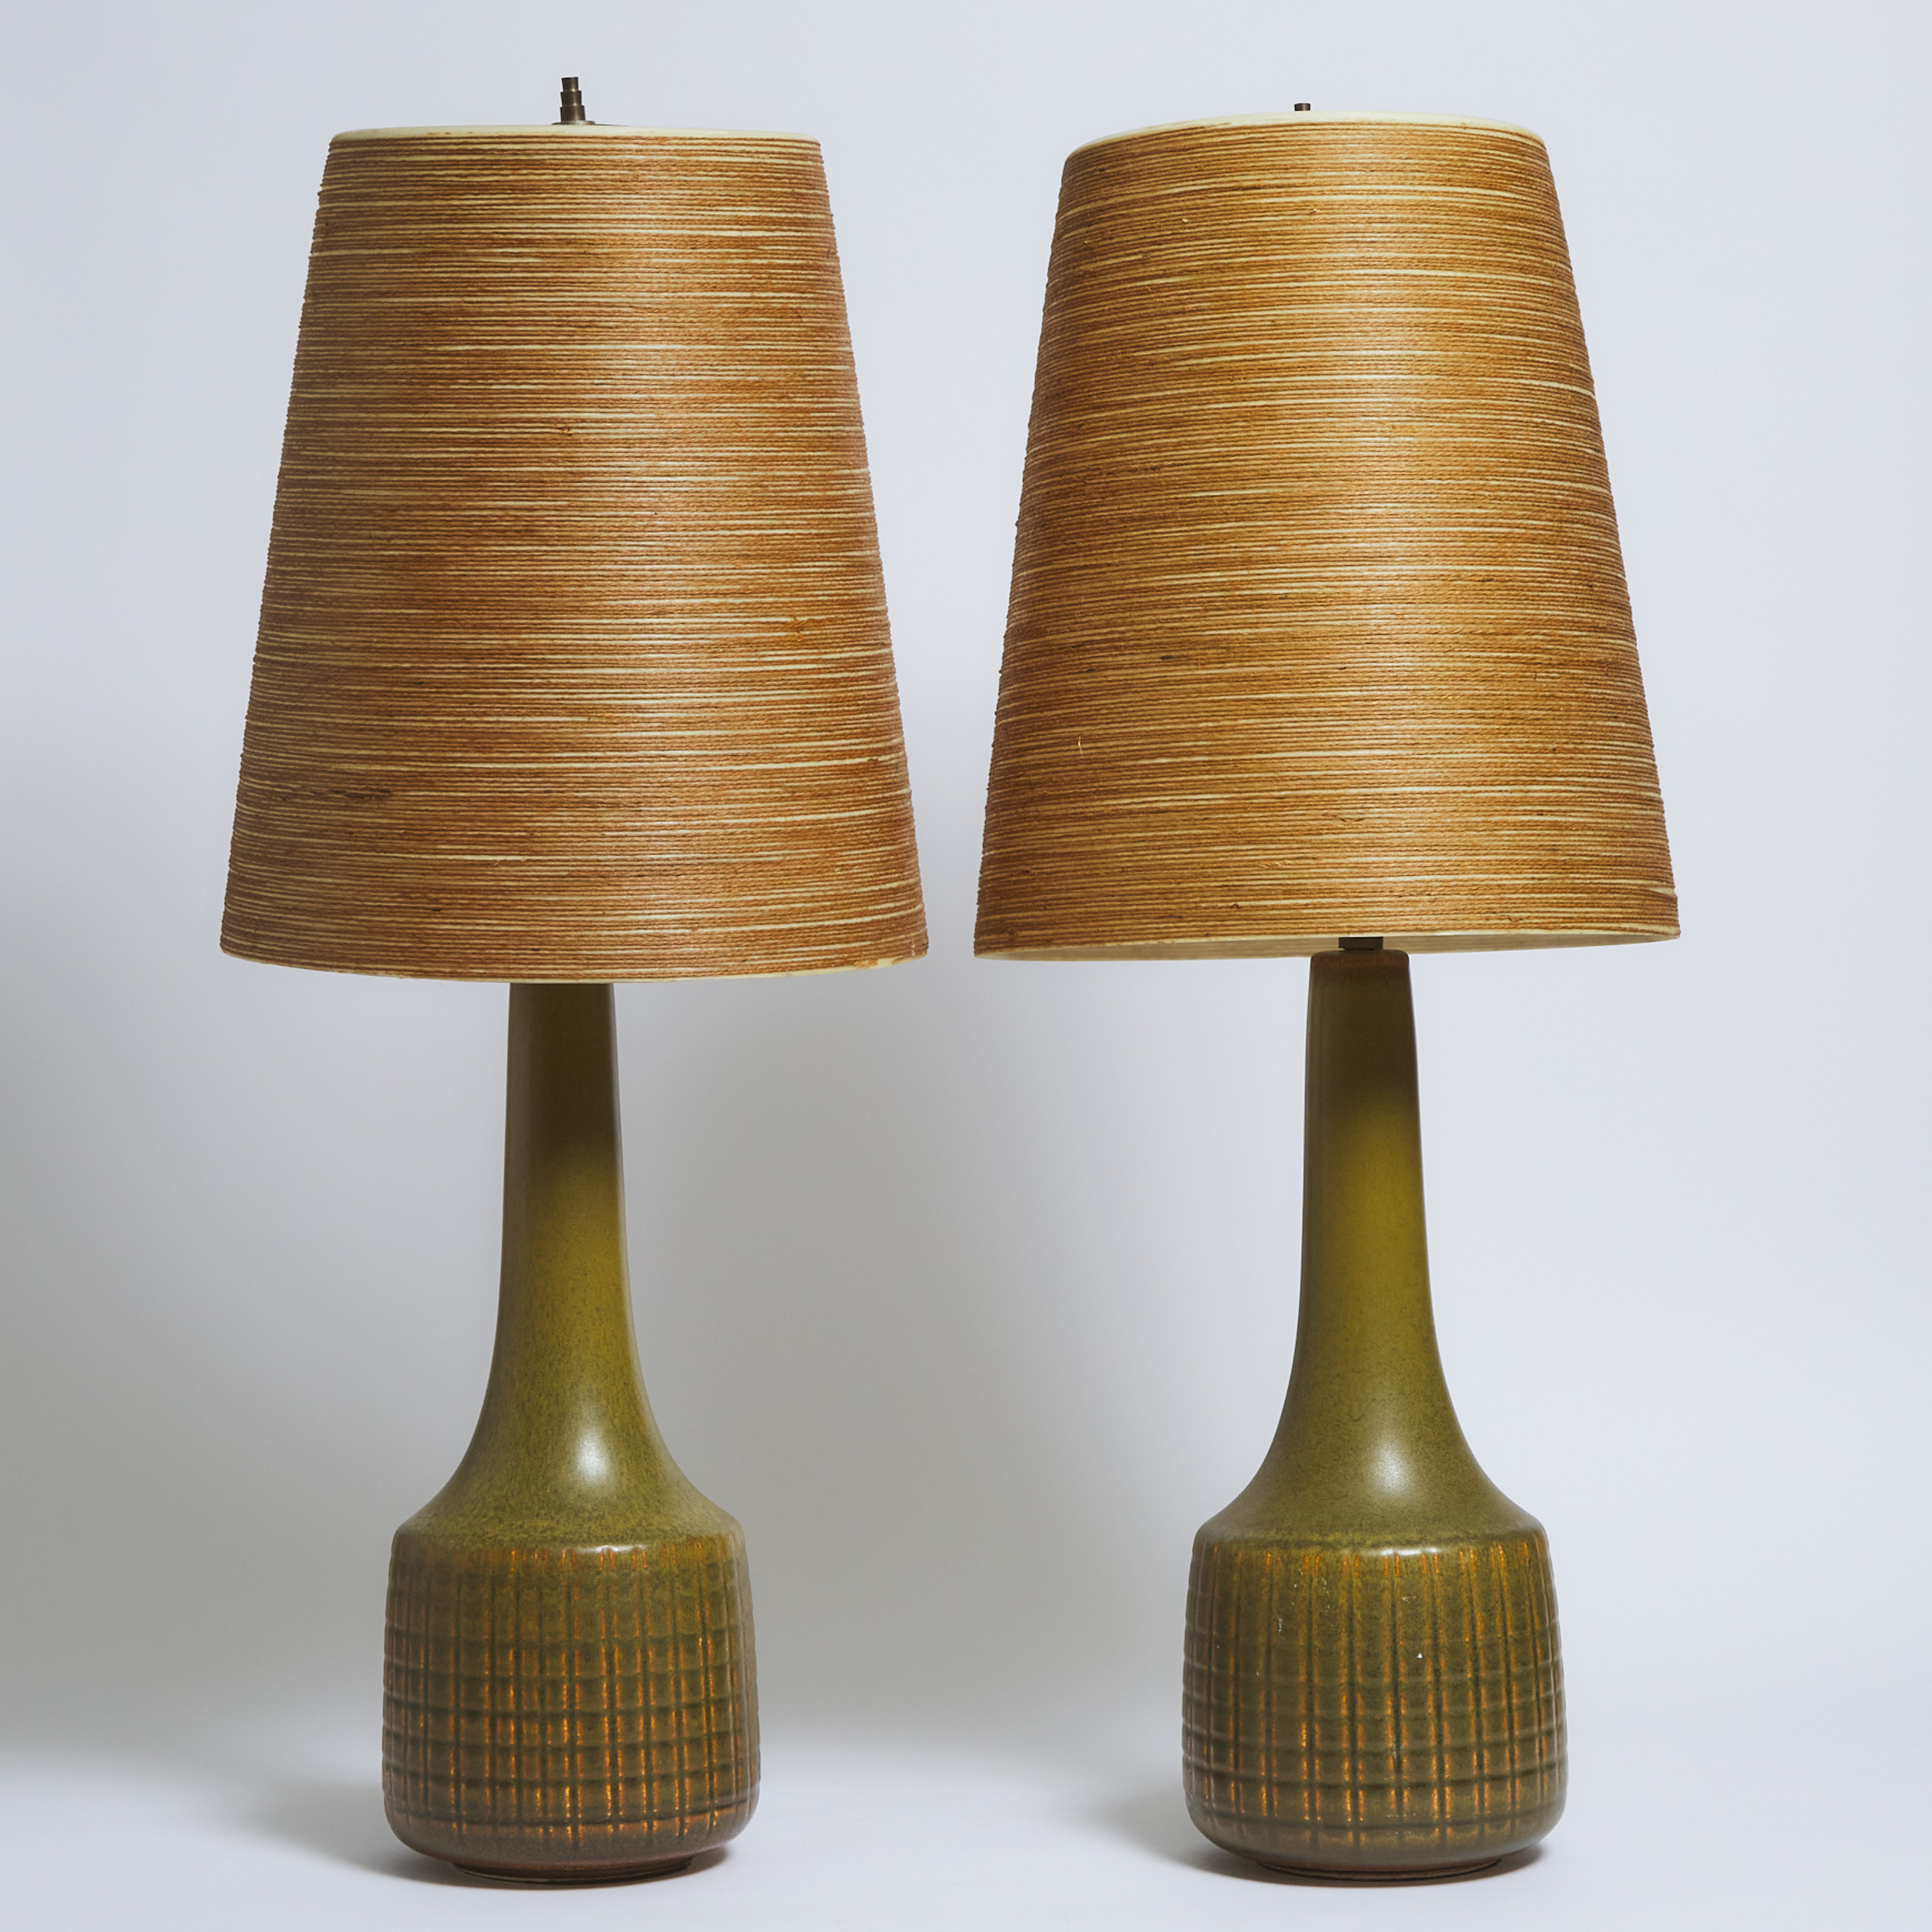 Pair of Lotte and Gunnar Bostlund Table Lamps, mid 20th century